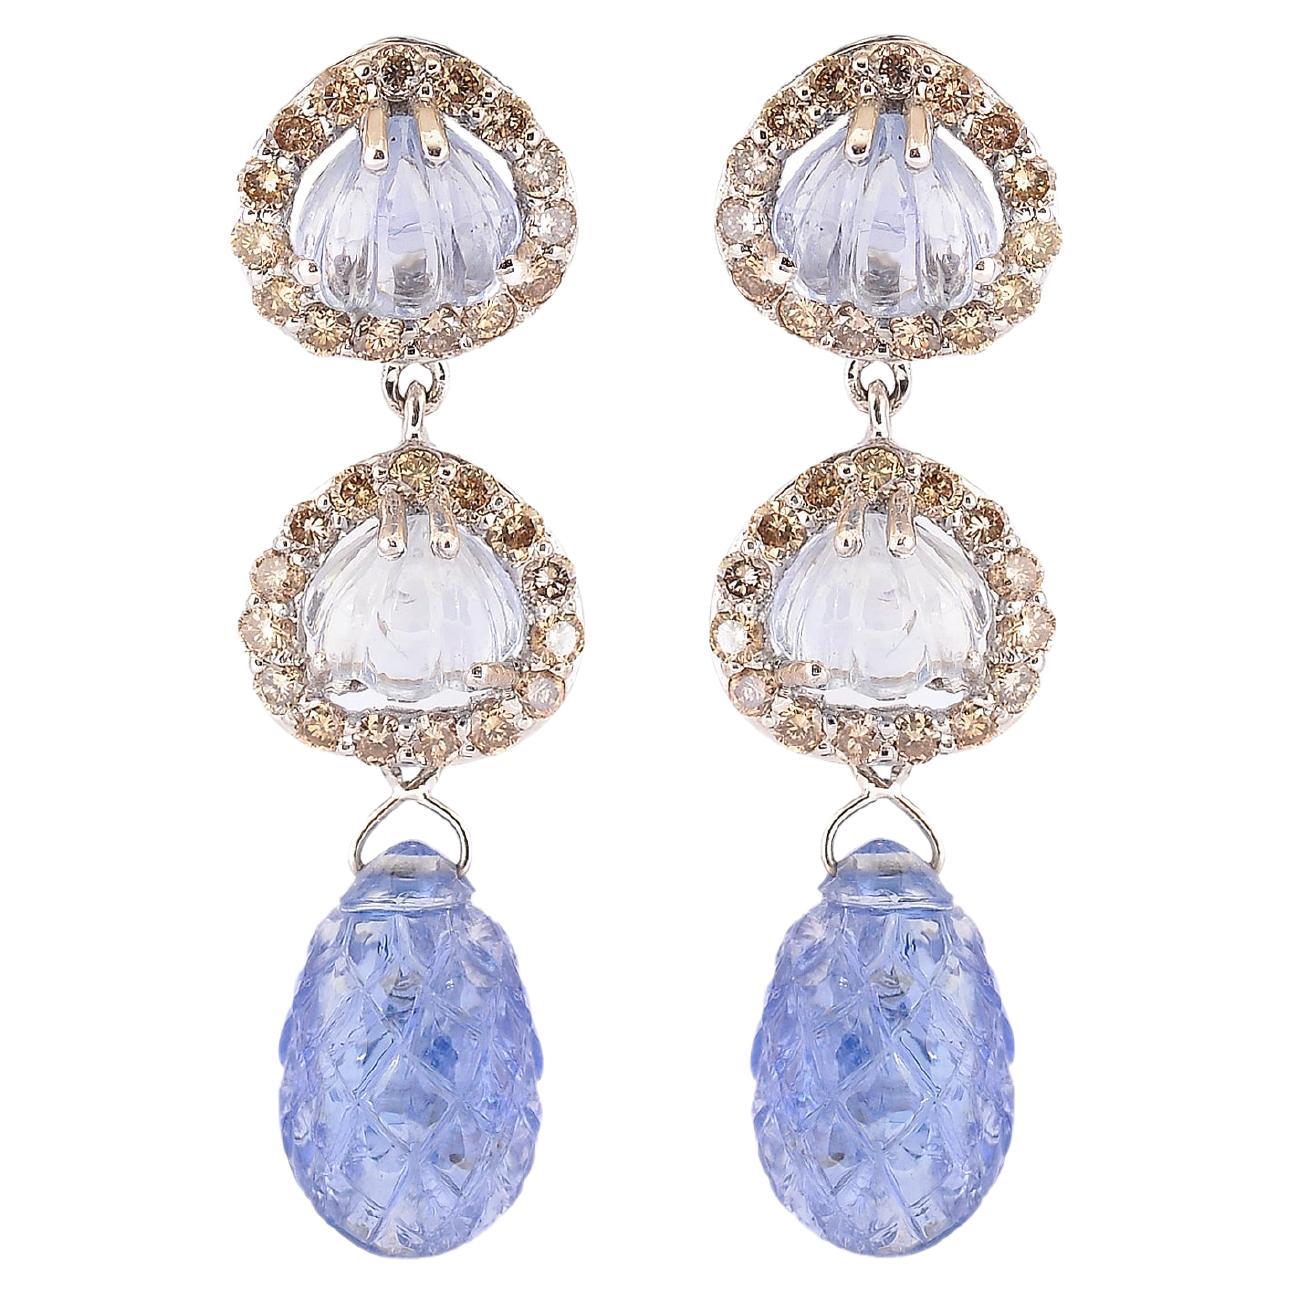 Exquisite 16.49 Carats Natural Carved Sapphire Dangling Earring Pair For Sale